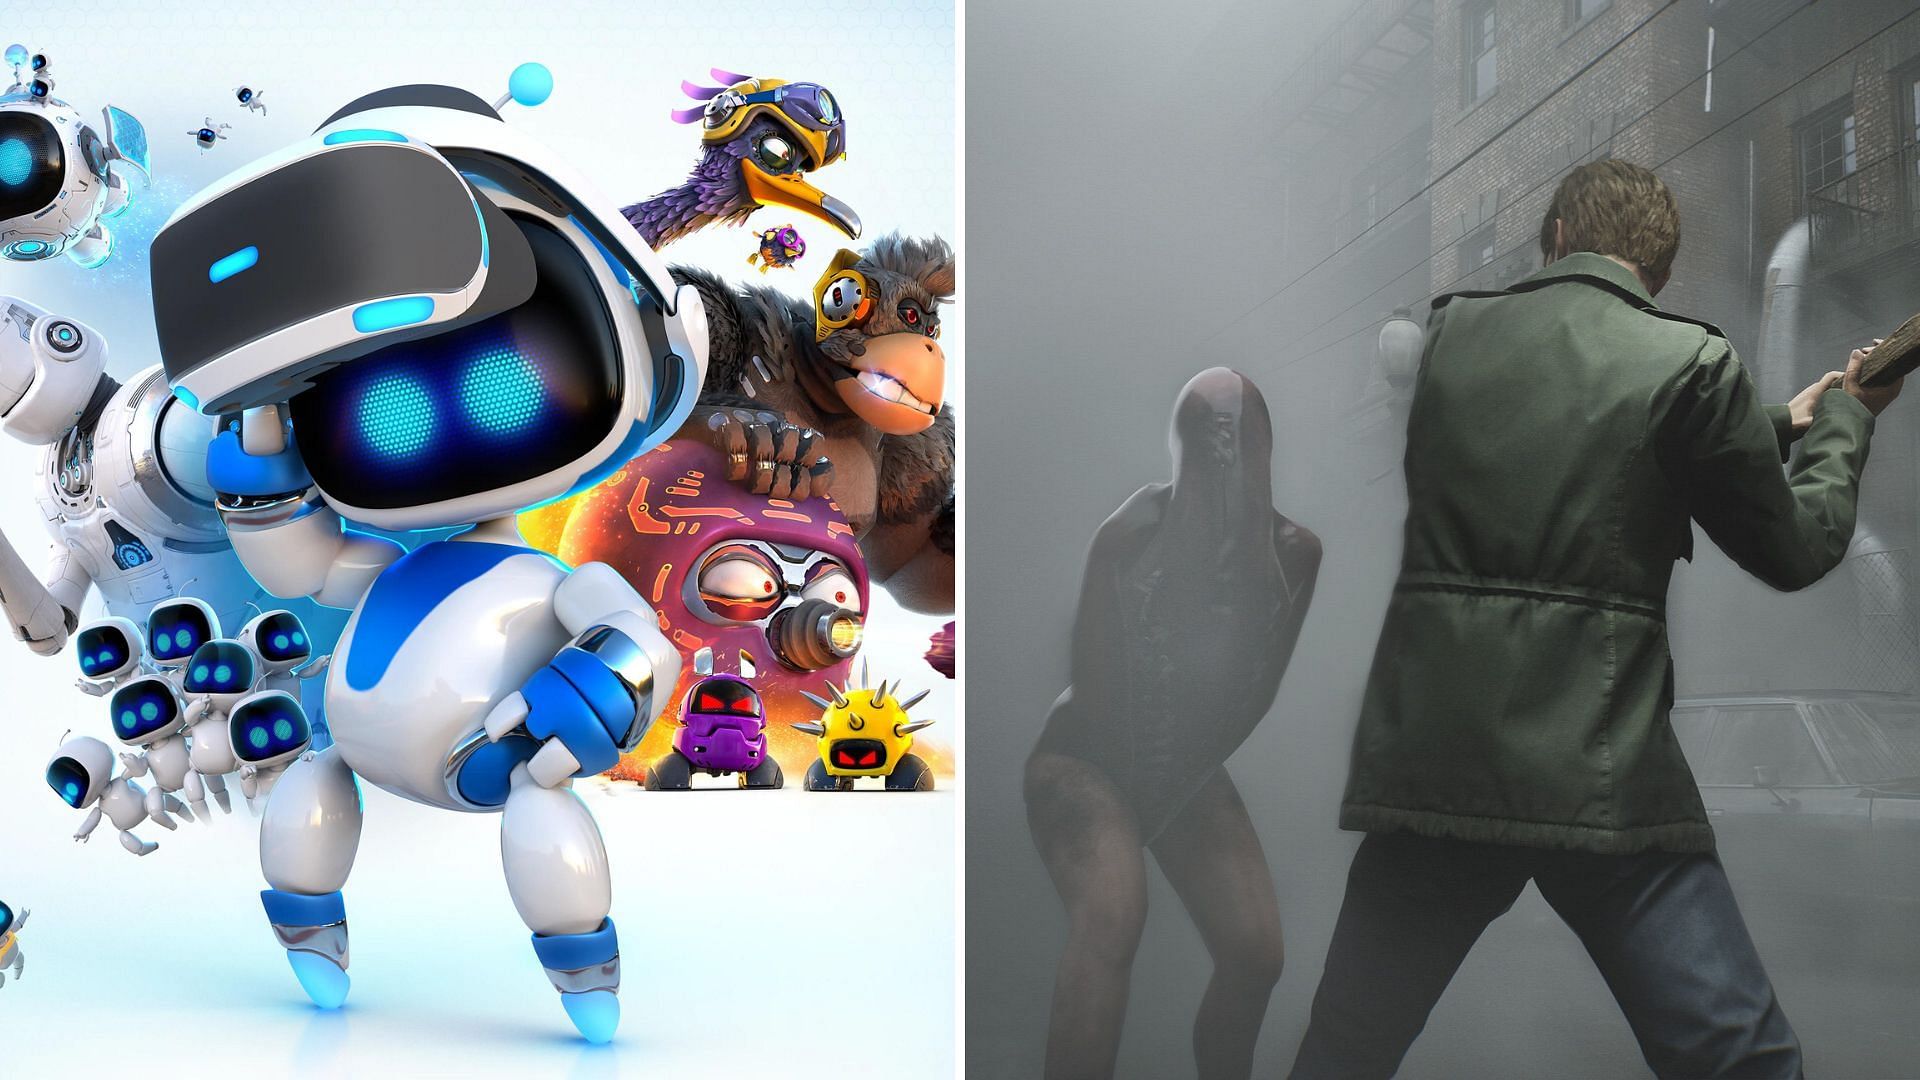 New leaks confirm the upcoming news for Astro Bot and Silent Hill (Image via Steam, PlayStation)